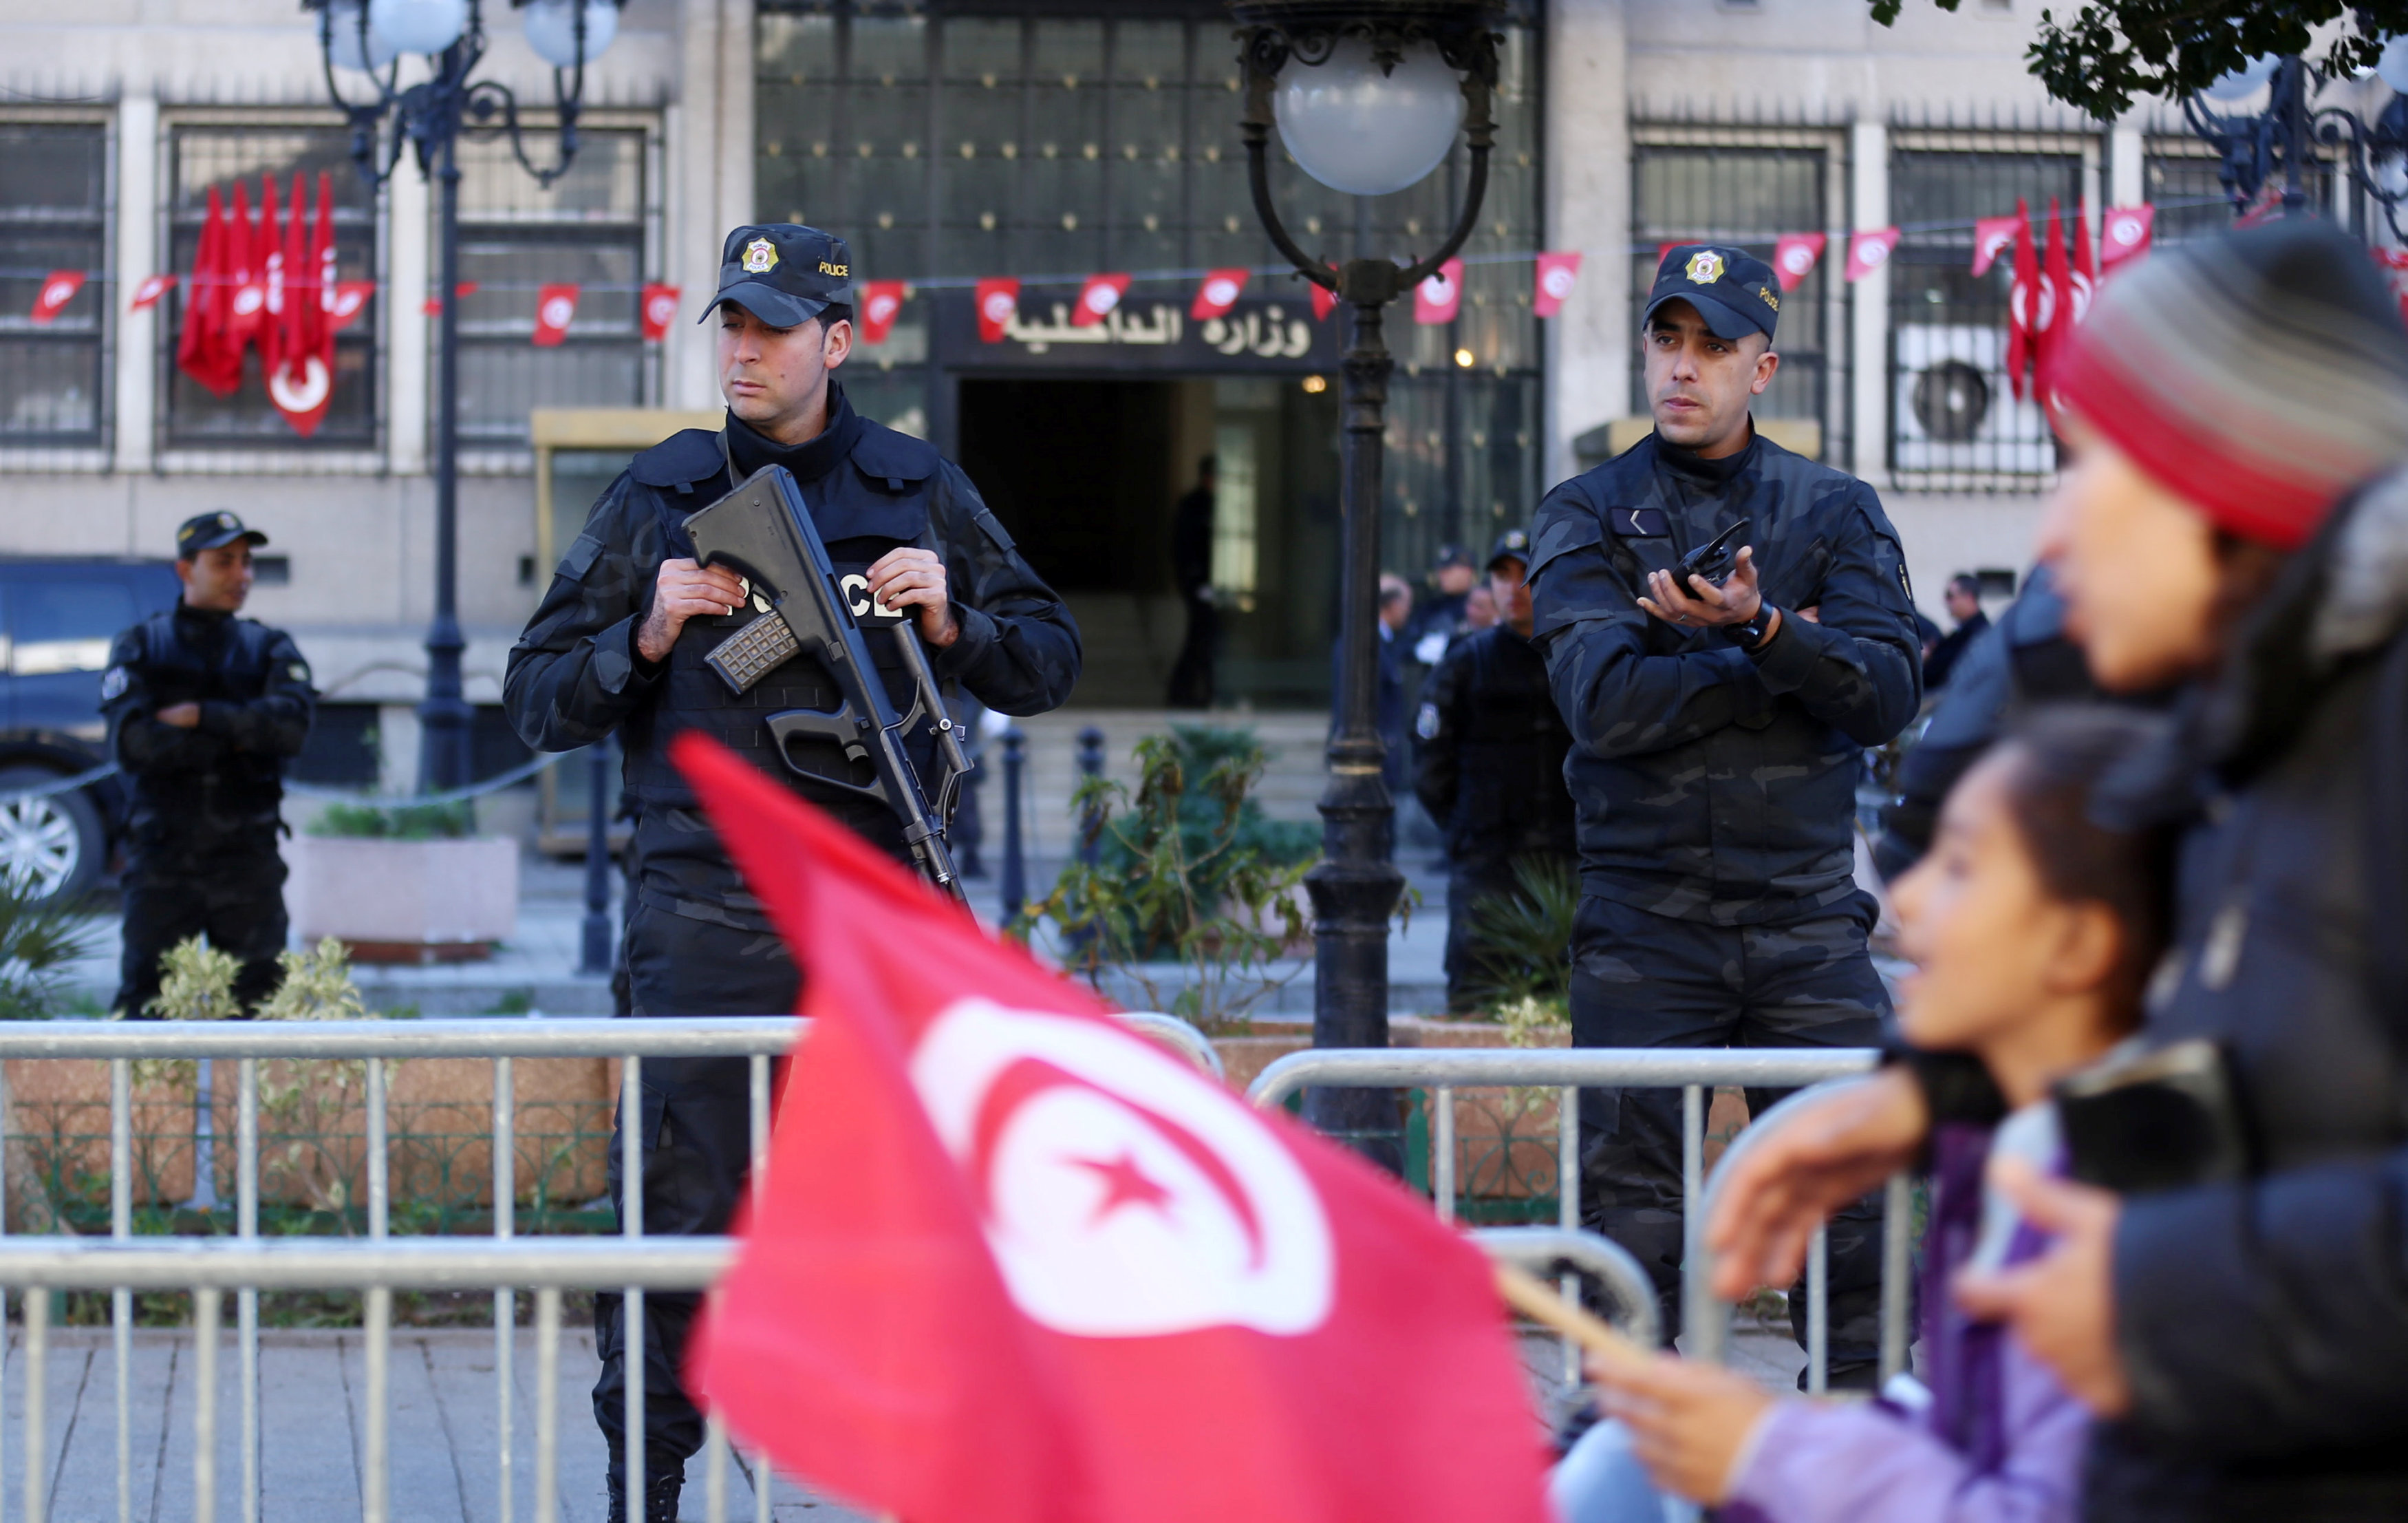 Tunisia arrests 41 more after fresh anti-austerity protests